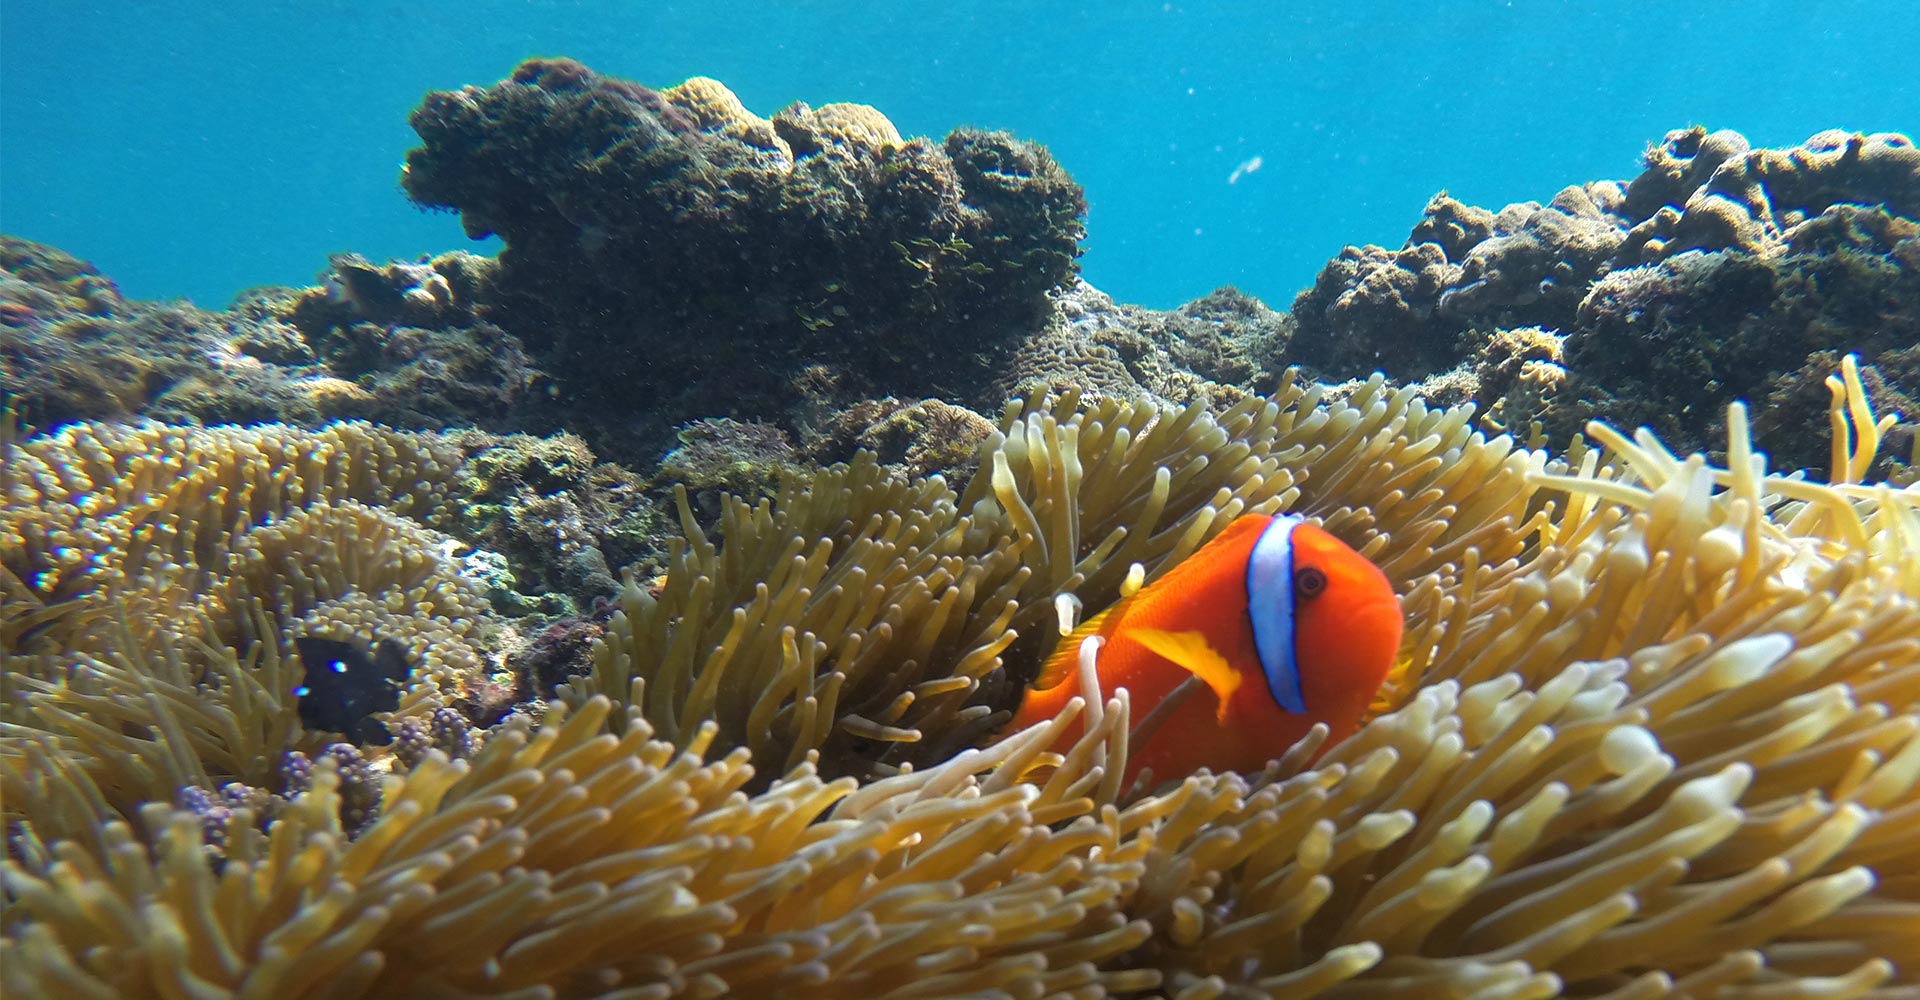 Great Barrier Reef aiming to be saved - Conjour Editorial - Australia Great Barrier Reef - Coral - Reef Fish - Feature Image - 1